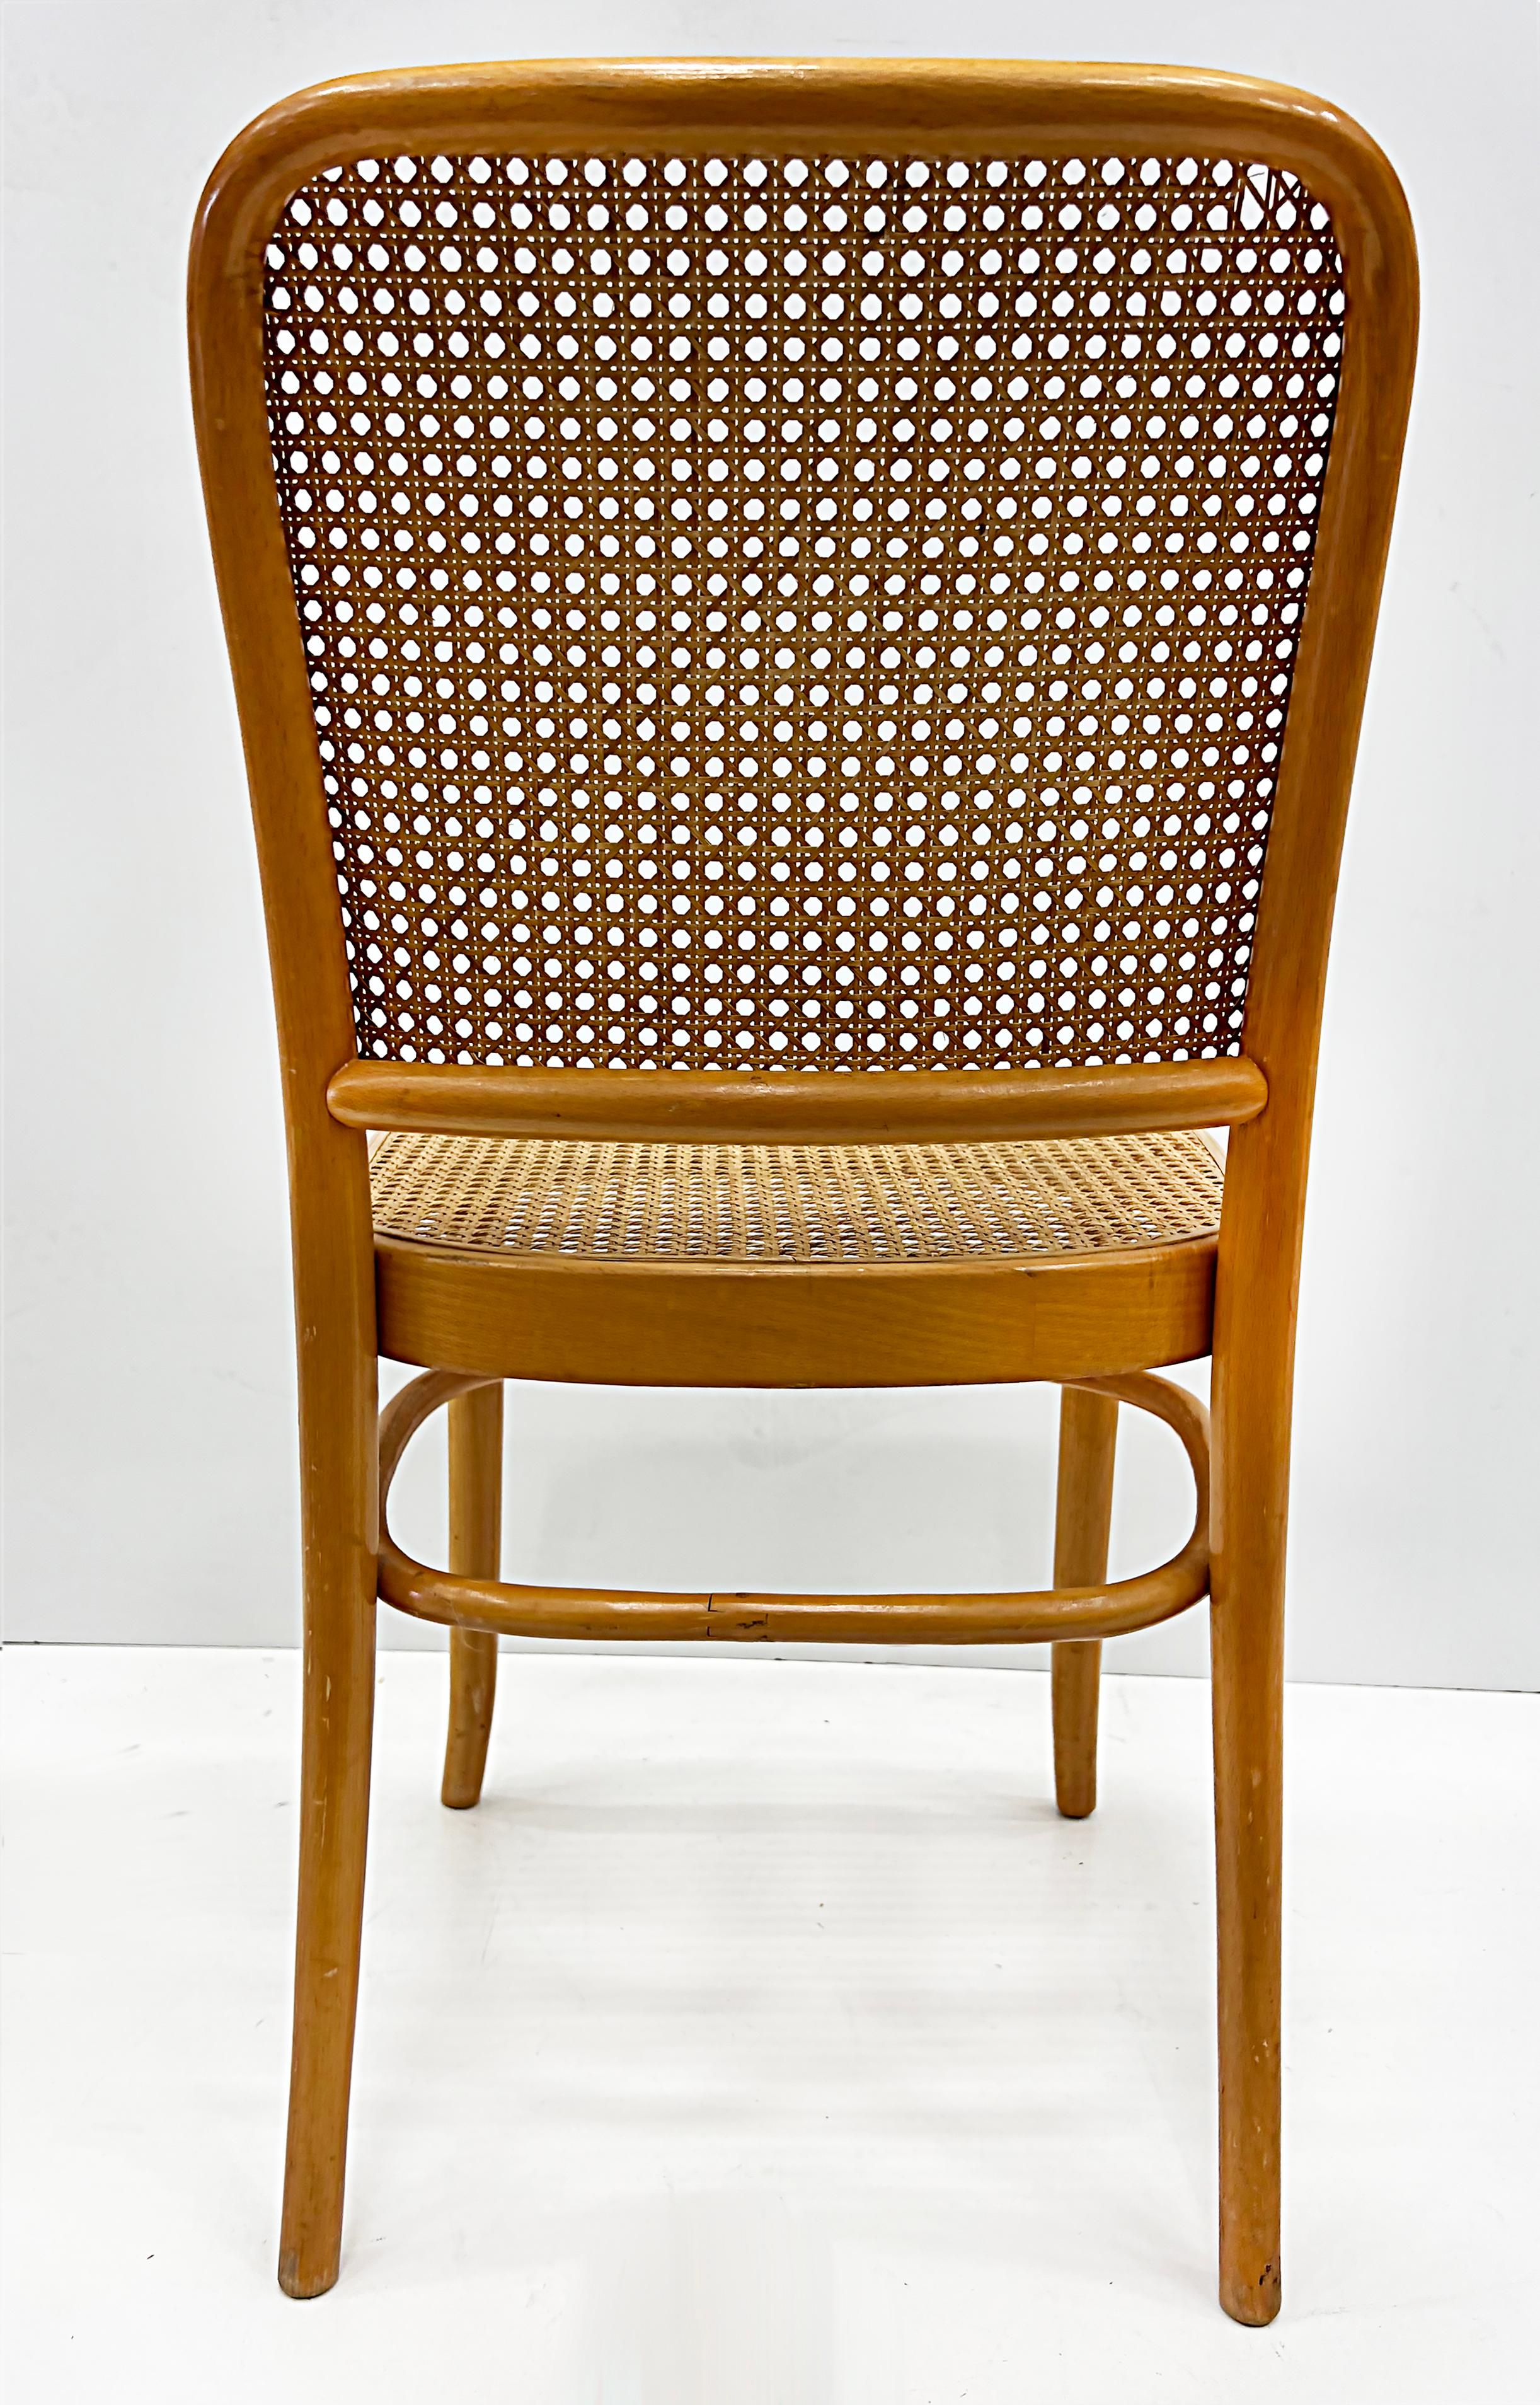 Salvatore Leone Vintage Bentwood Caned Chairs, Thonet Style For Sale 1